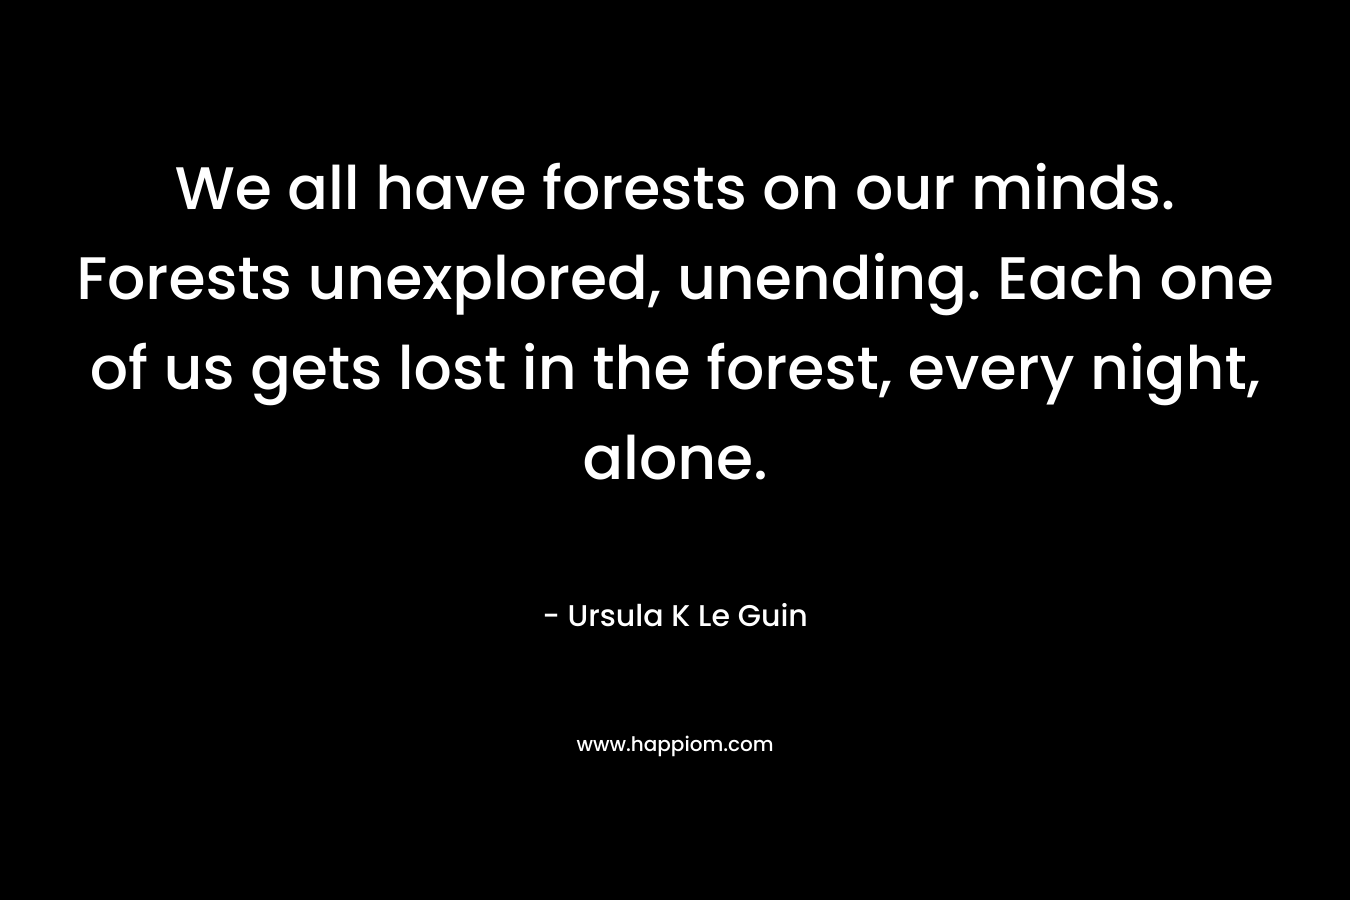 We all have forests on our minds. Forests unexplored, unending. Each one of us gets lost in the forest, every night, alone. – Ursula K Le Guin